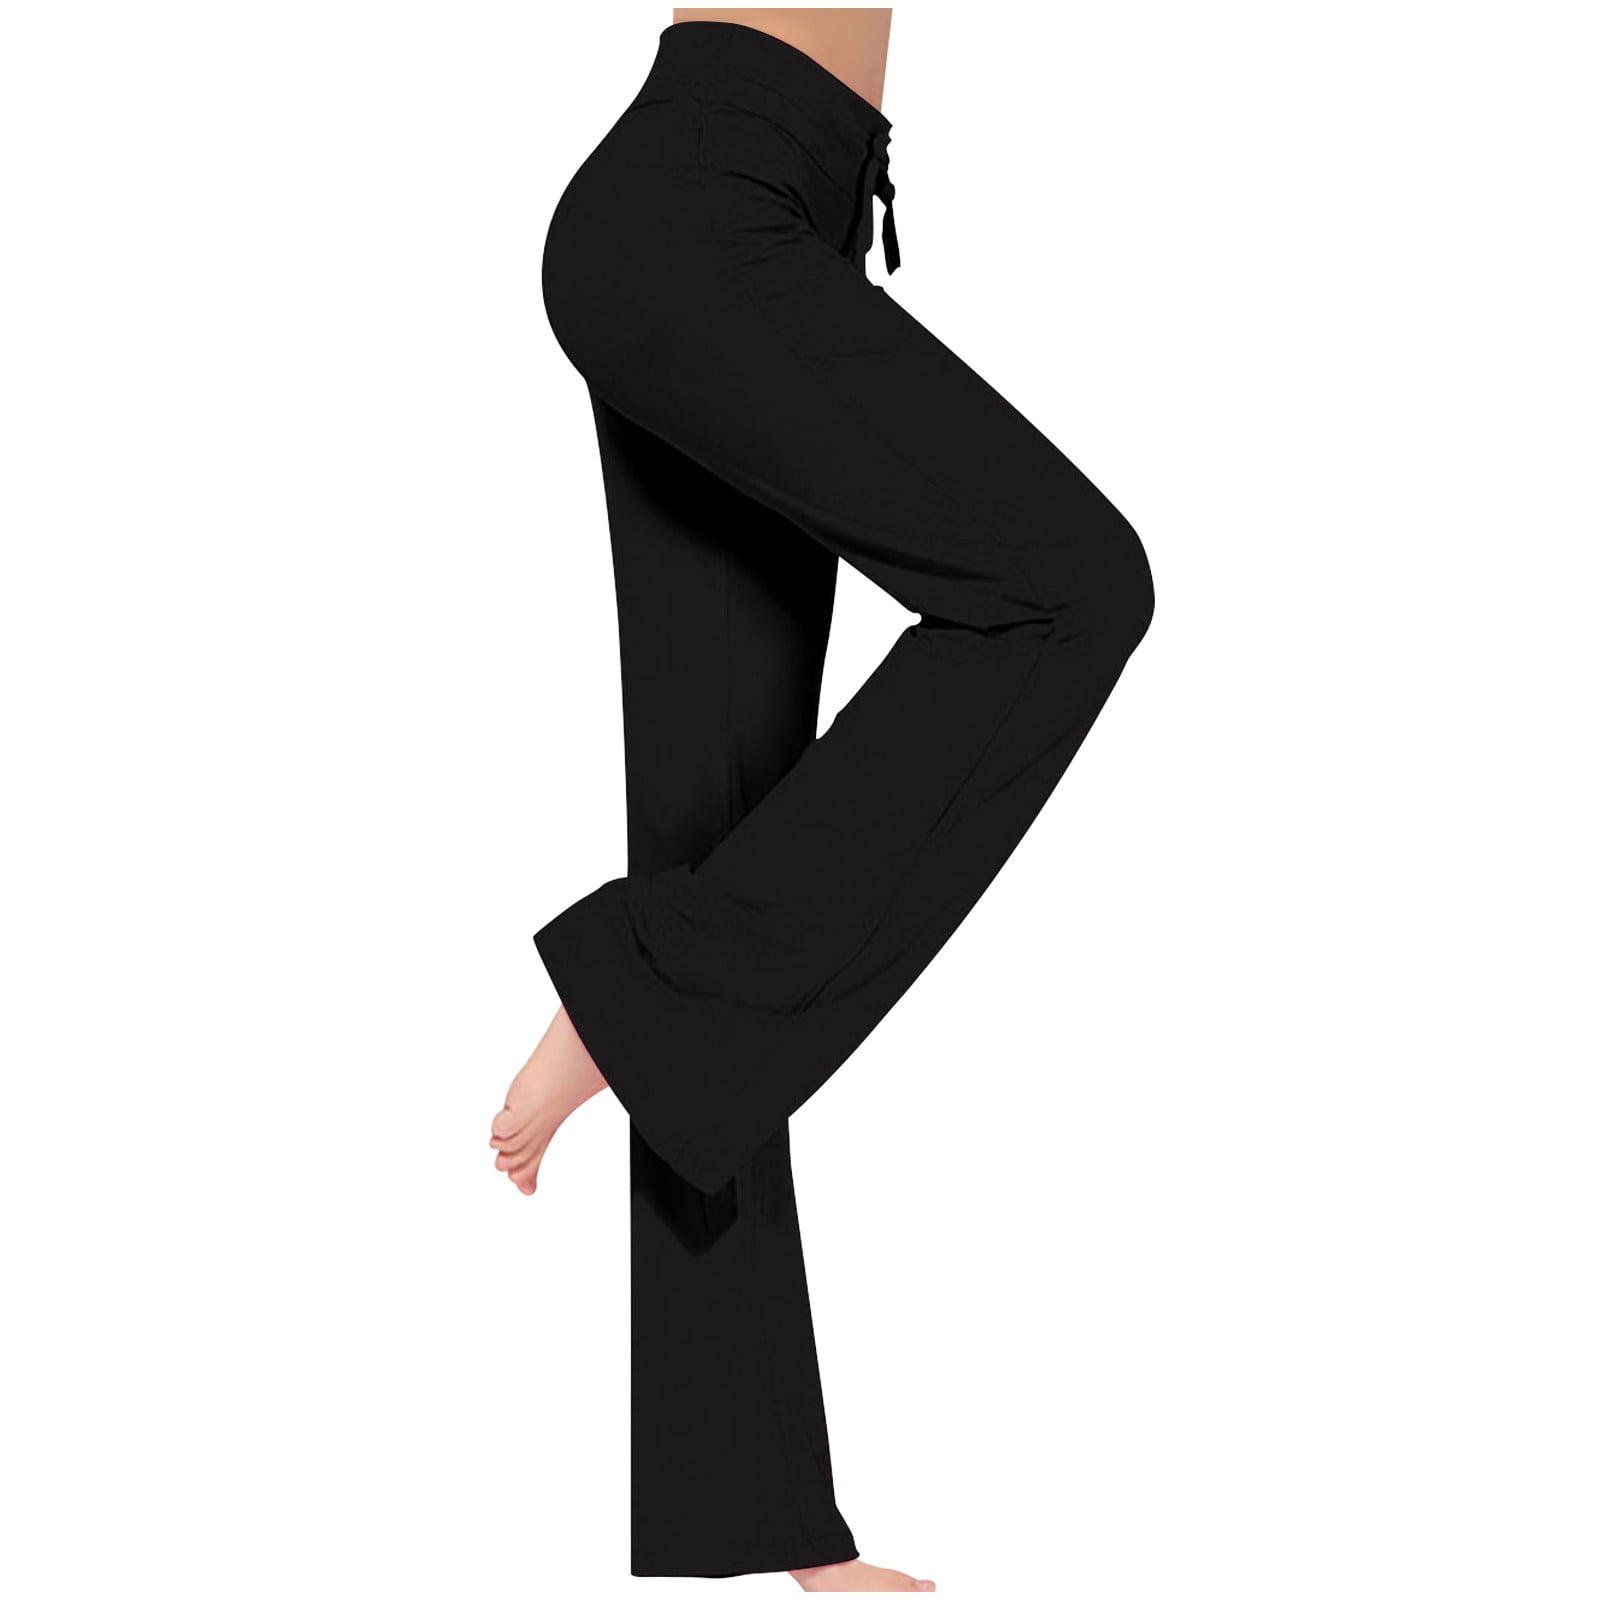 Elegant Maroon Dry Fit Yoga Trousers For Women at Rs 1122.00 | Gym Pants,  Gym Tights, Streatchable Track Pant For Gym, Mens Fitness Pants, Gym Pants  For Ladies - Ramshiv Exports, Coimbatore | ID: 26133675955